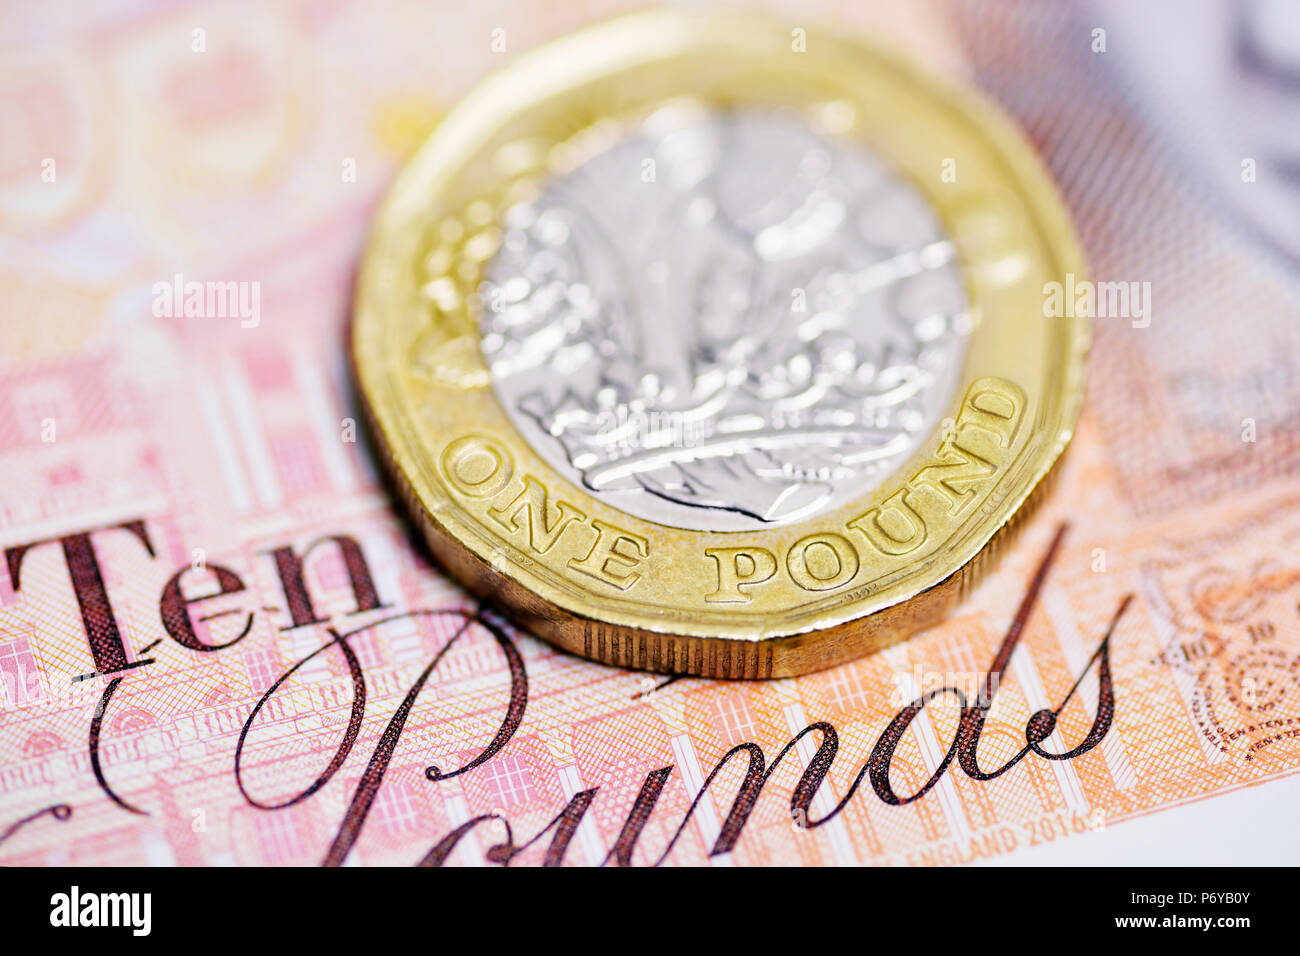 Pound Coin on a Ten Pound Note, Close Up Stock Photo